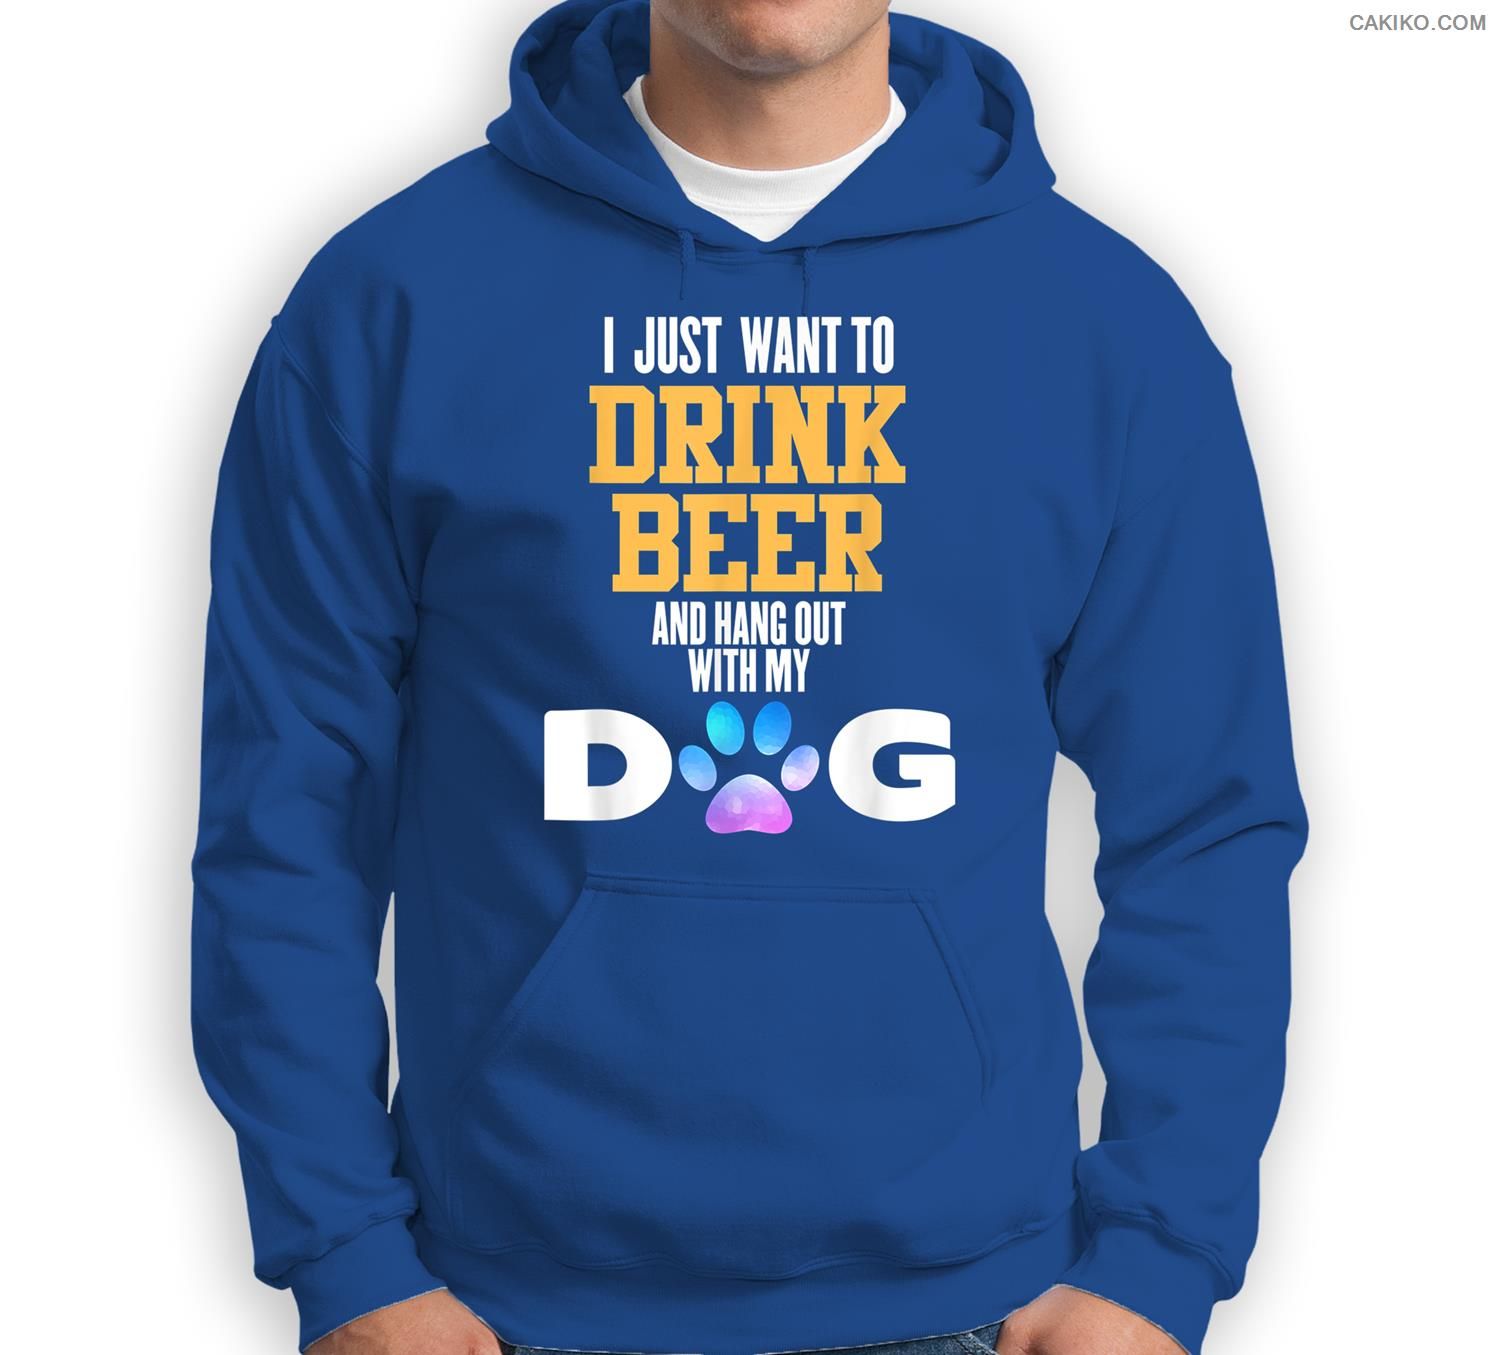 I Just Want To Drink Beer, And Hang Out With My Dog Sweatshirt & Hoodie